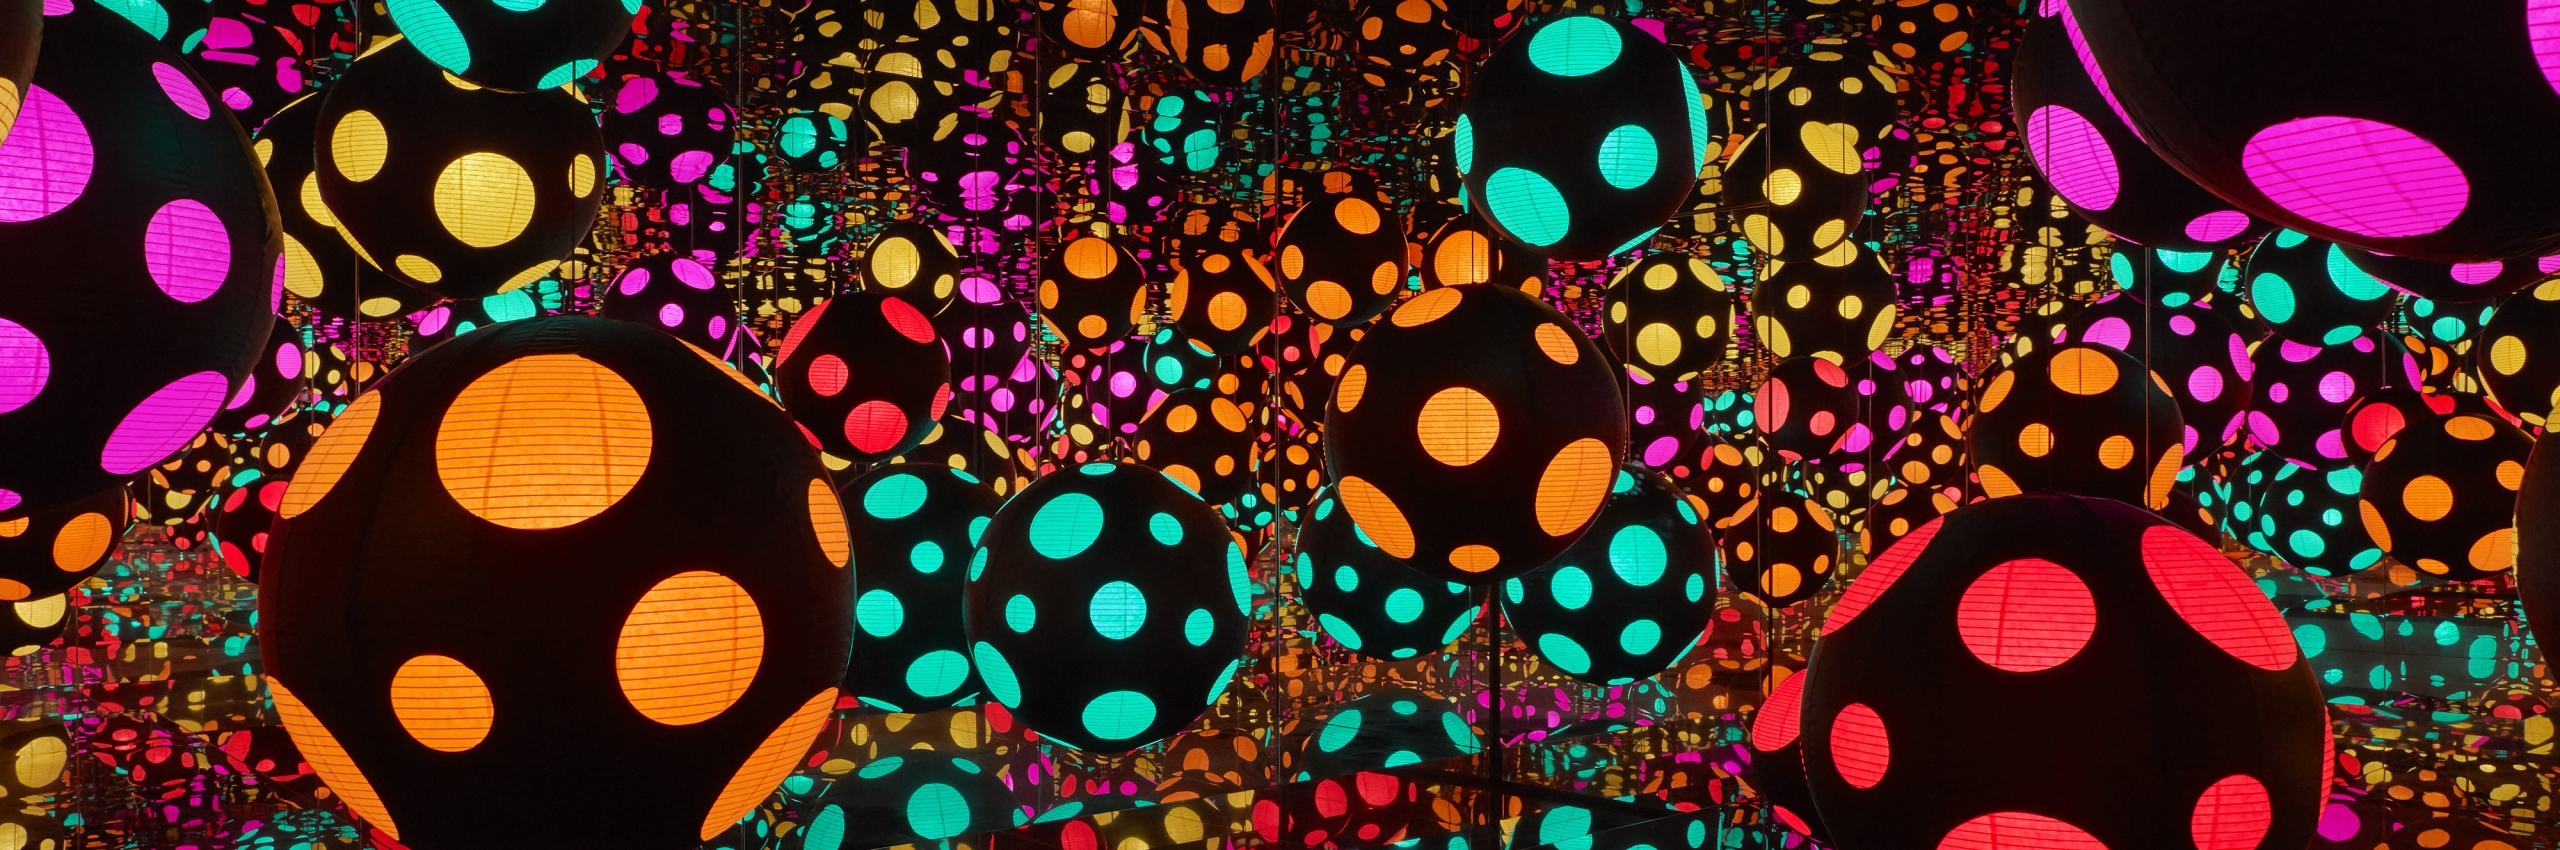 infinity room with colorful dotted orbs